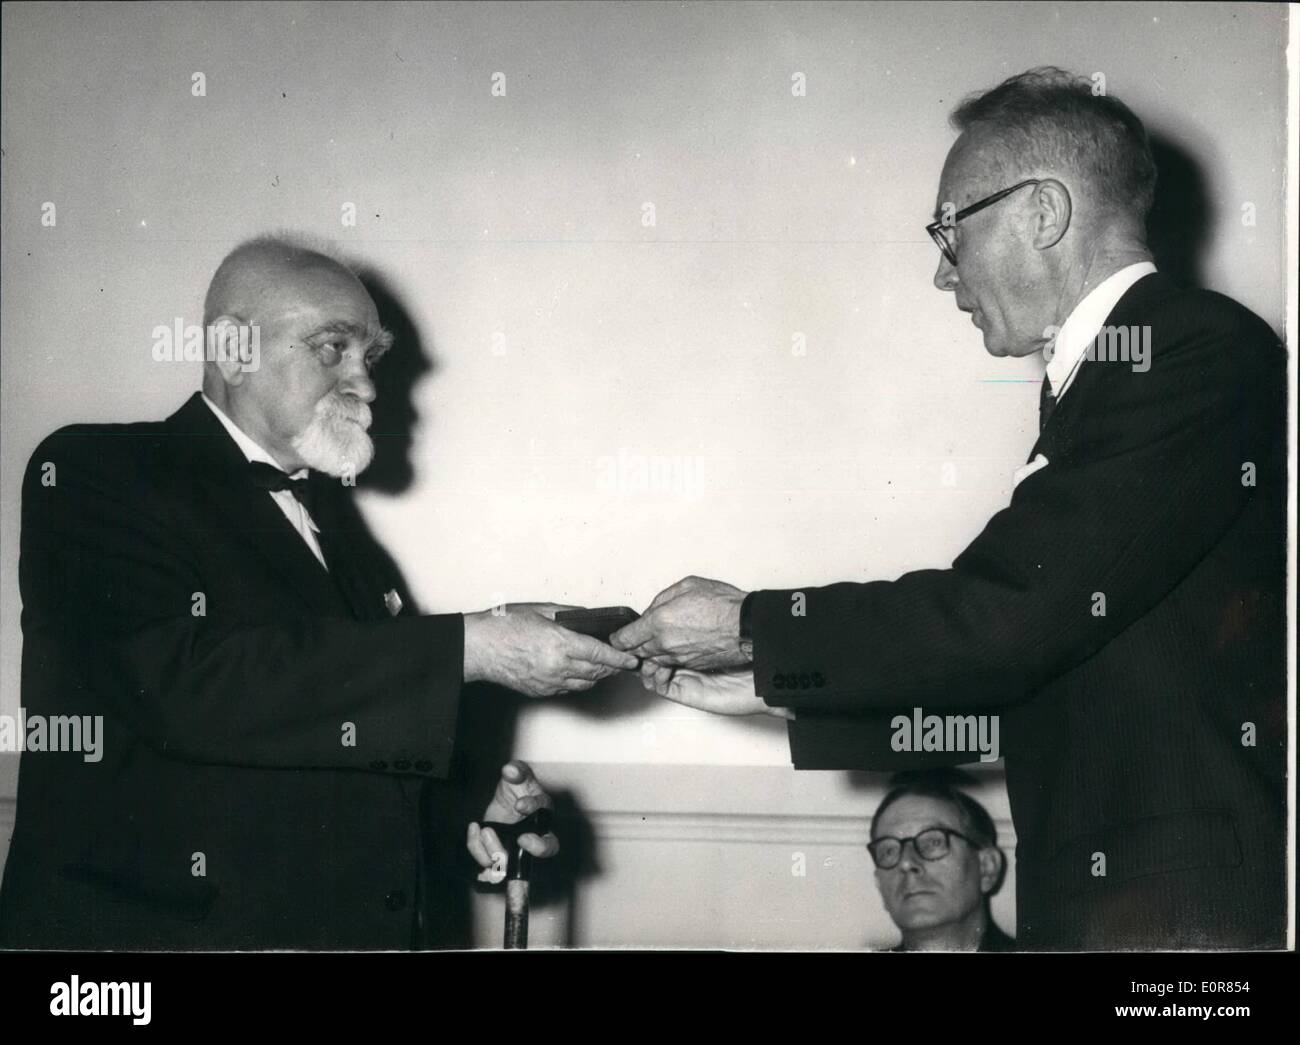 Jul. 07, 1958 - Biologists receive Darwin medal: British and foreign botanists and zoologists nominated for the award of a silver Darwin - Wallace Commemorative Medal in recognition of their outstanding contribution to the knowledge of evolution, were presented with the Medal at a meeting of the Linnean Society, at the Royal Geographical Society today. Photo shows Academician Eugene Pavlosky, receiving his Medal, this afternoon. Stock Photo